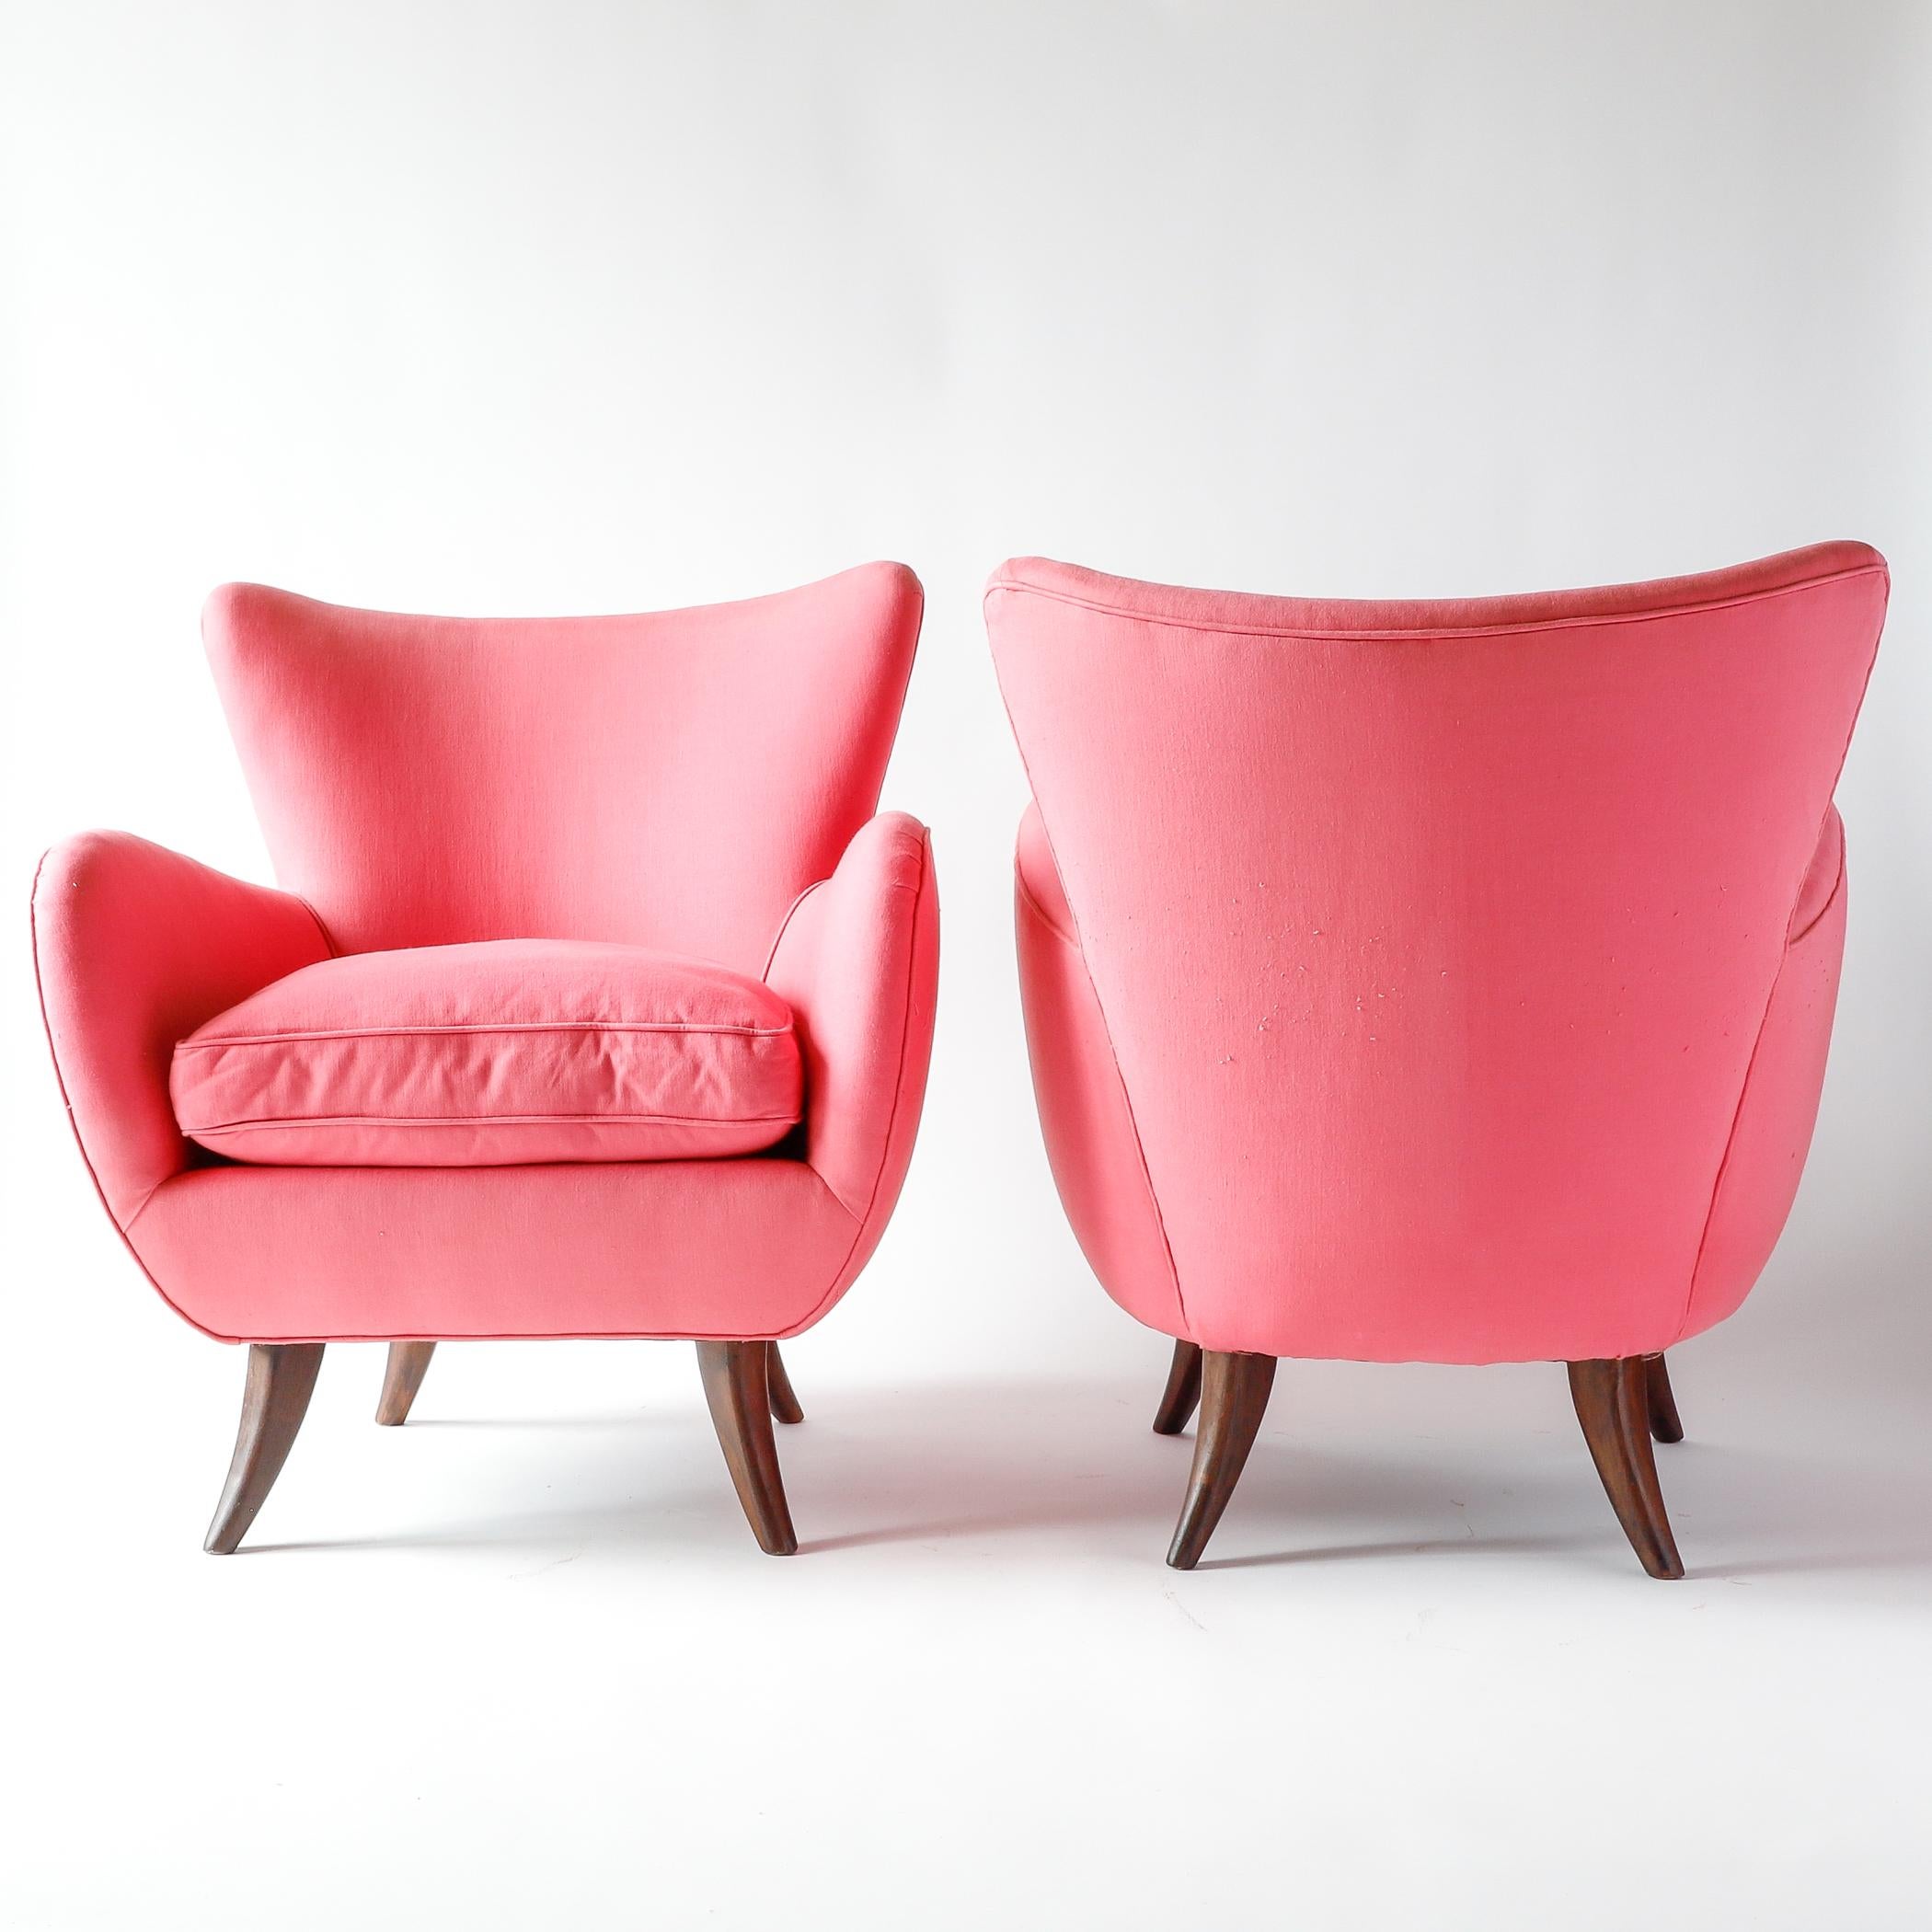 Mid-Century Modern Pair of Ernst Schwadron Upholstered Lounge Chairs, 1940s, Bright Pink For Sale